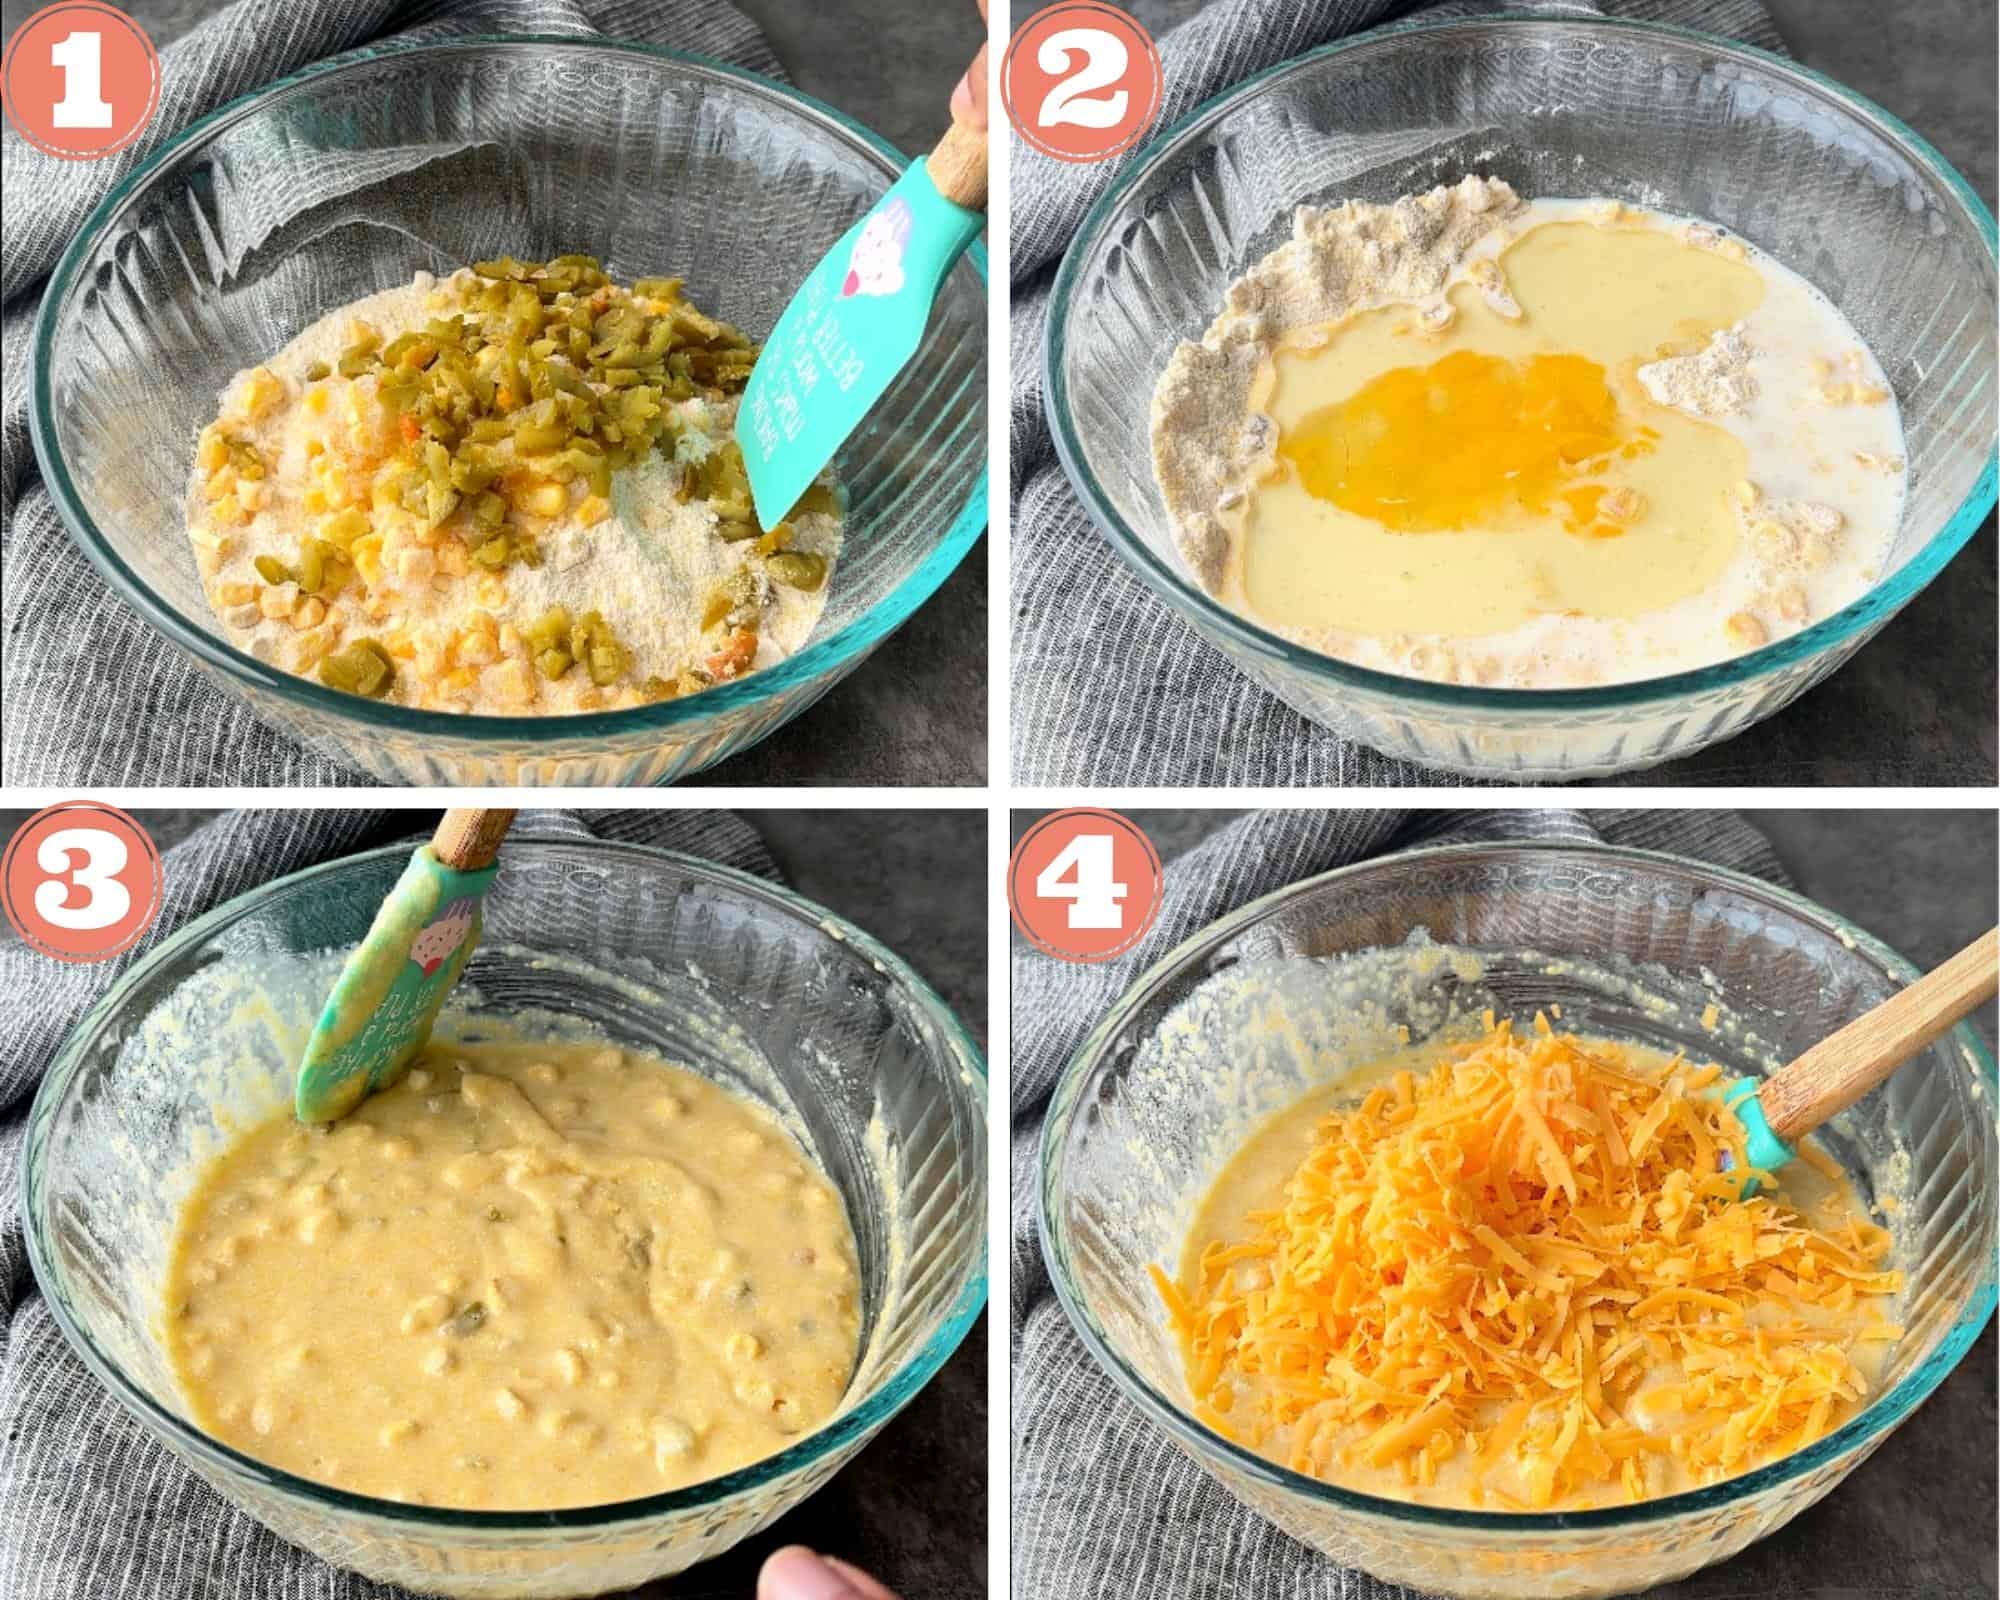 4-photo grid showing steps 1 to 4 or preparing cornbread batter with cheese, corn and jalapenos